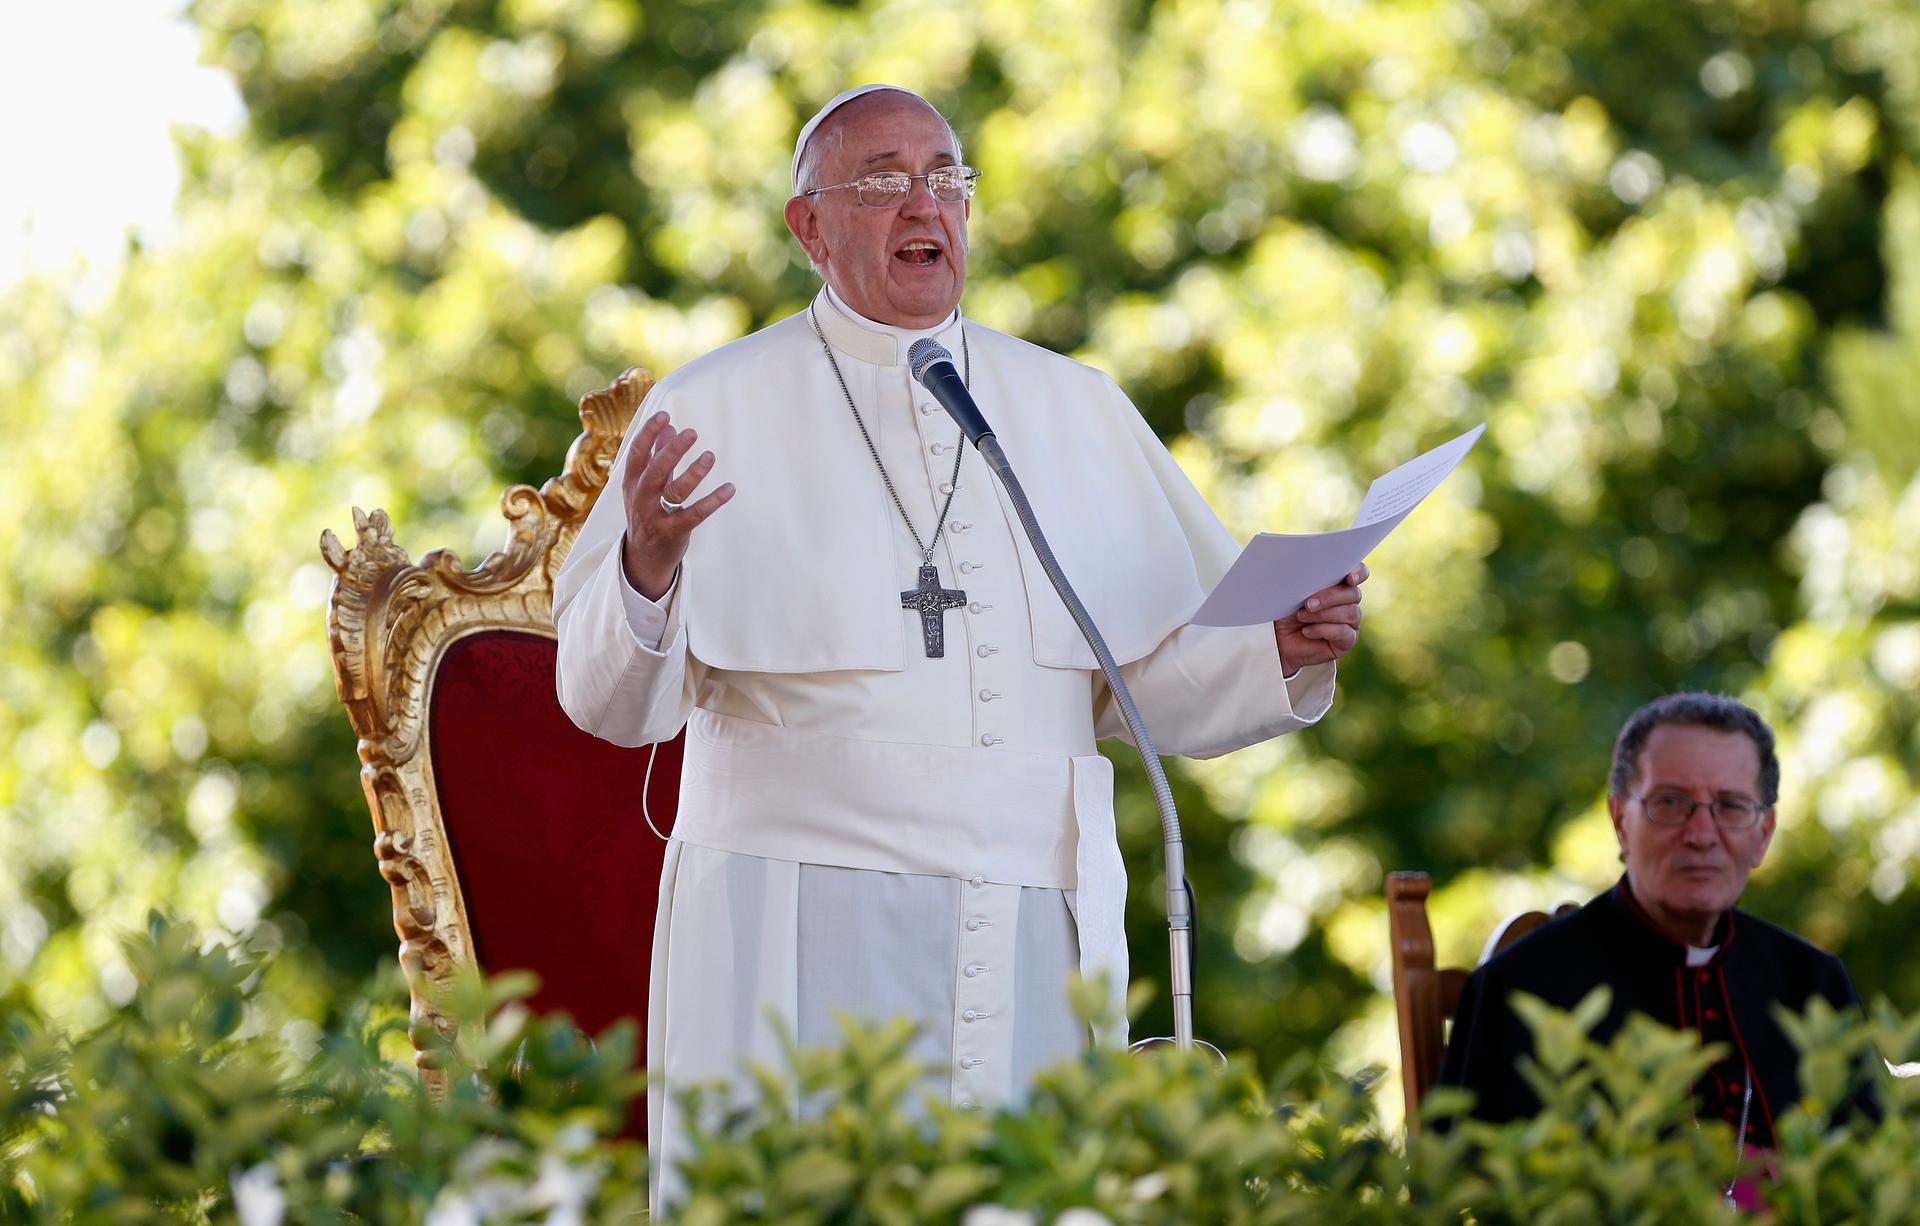 Pope Francis speaks outside the Castelpetroso sanctuary near Isernia in southern Italy on July 5, 2014. During the speech, he told students that environmental damage was a sin.